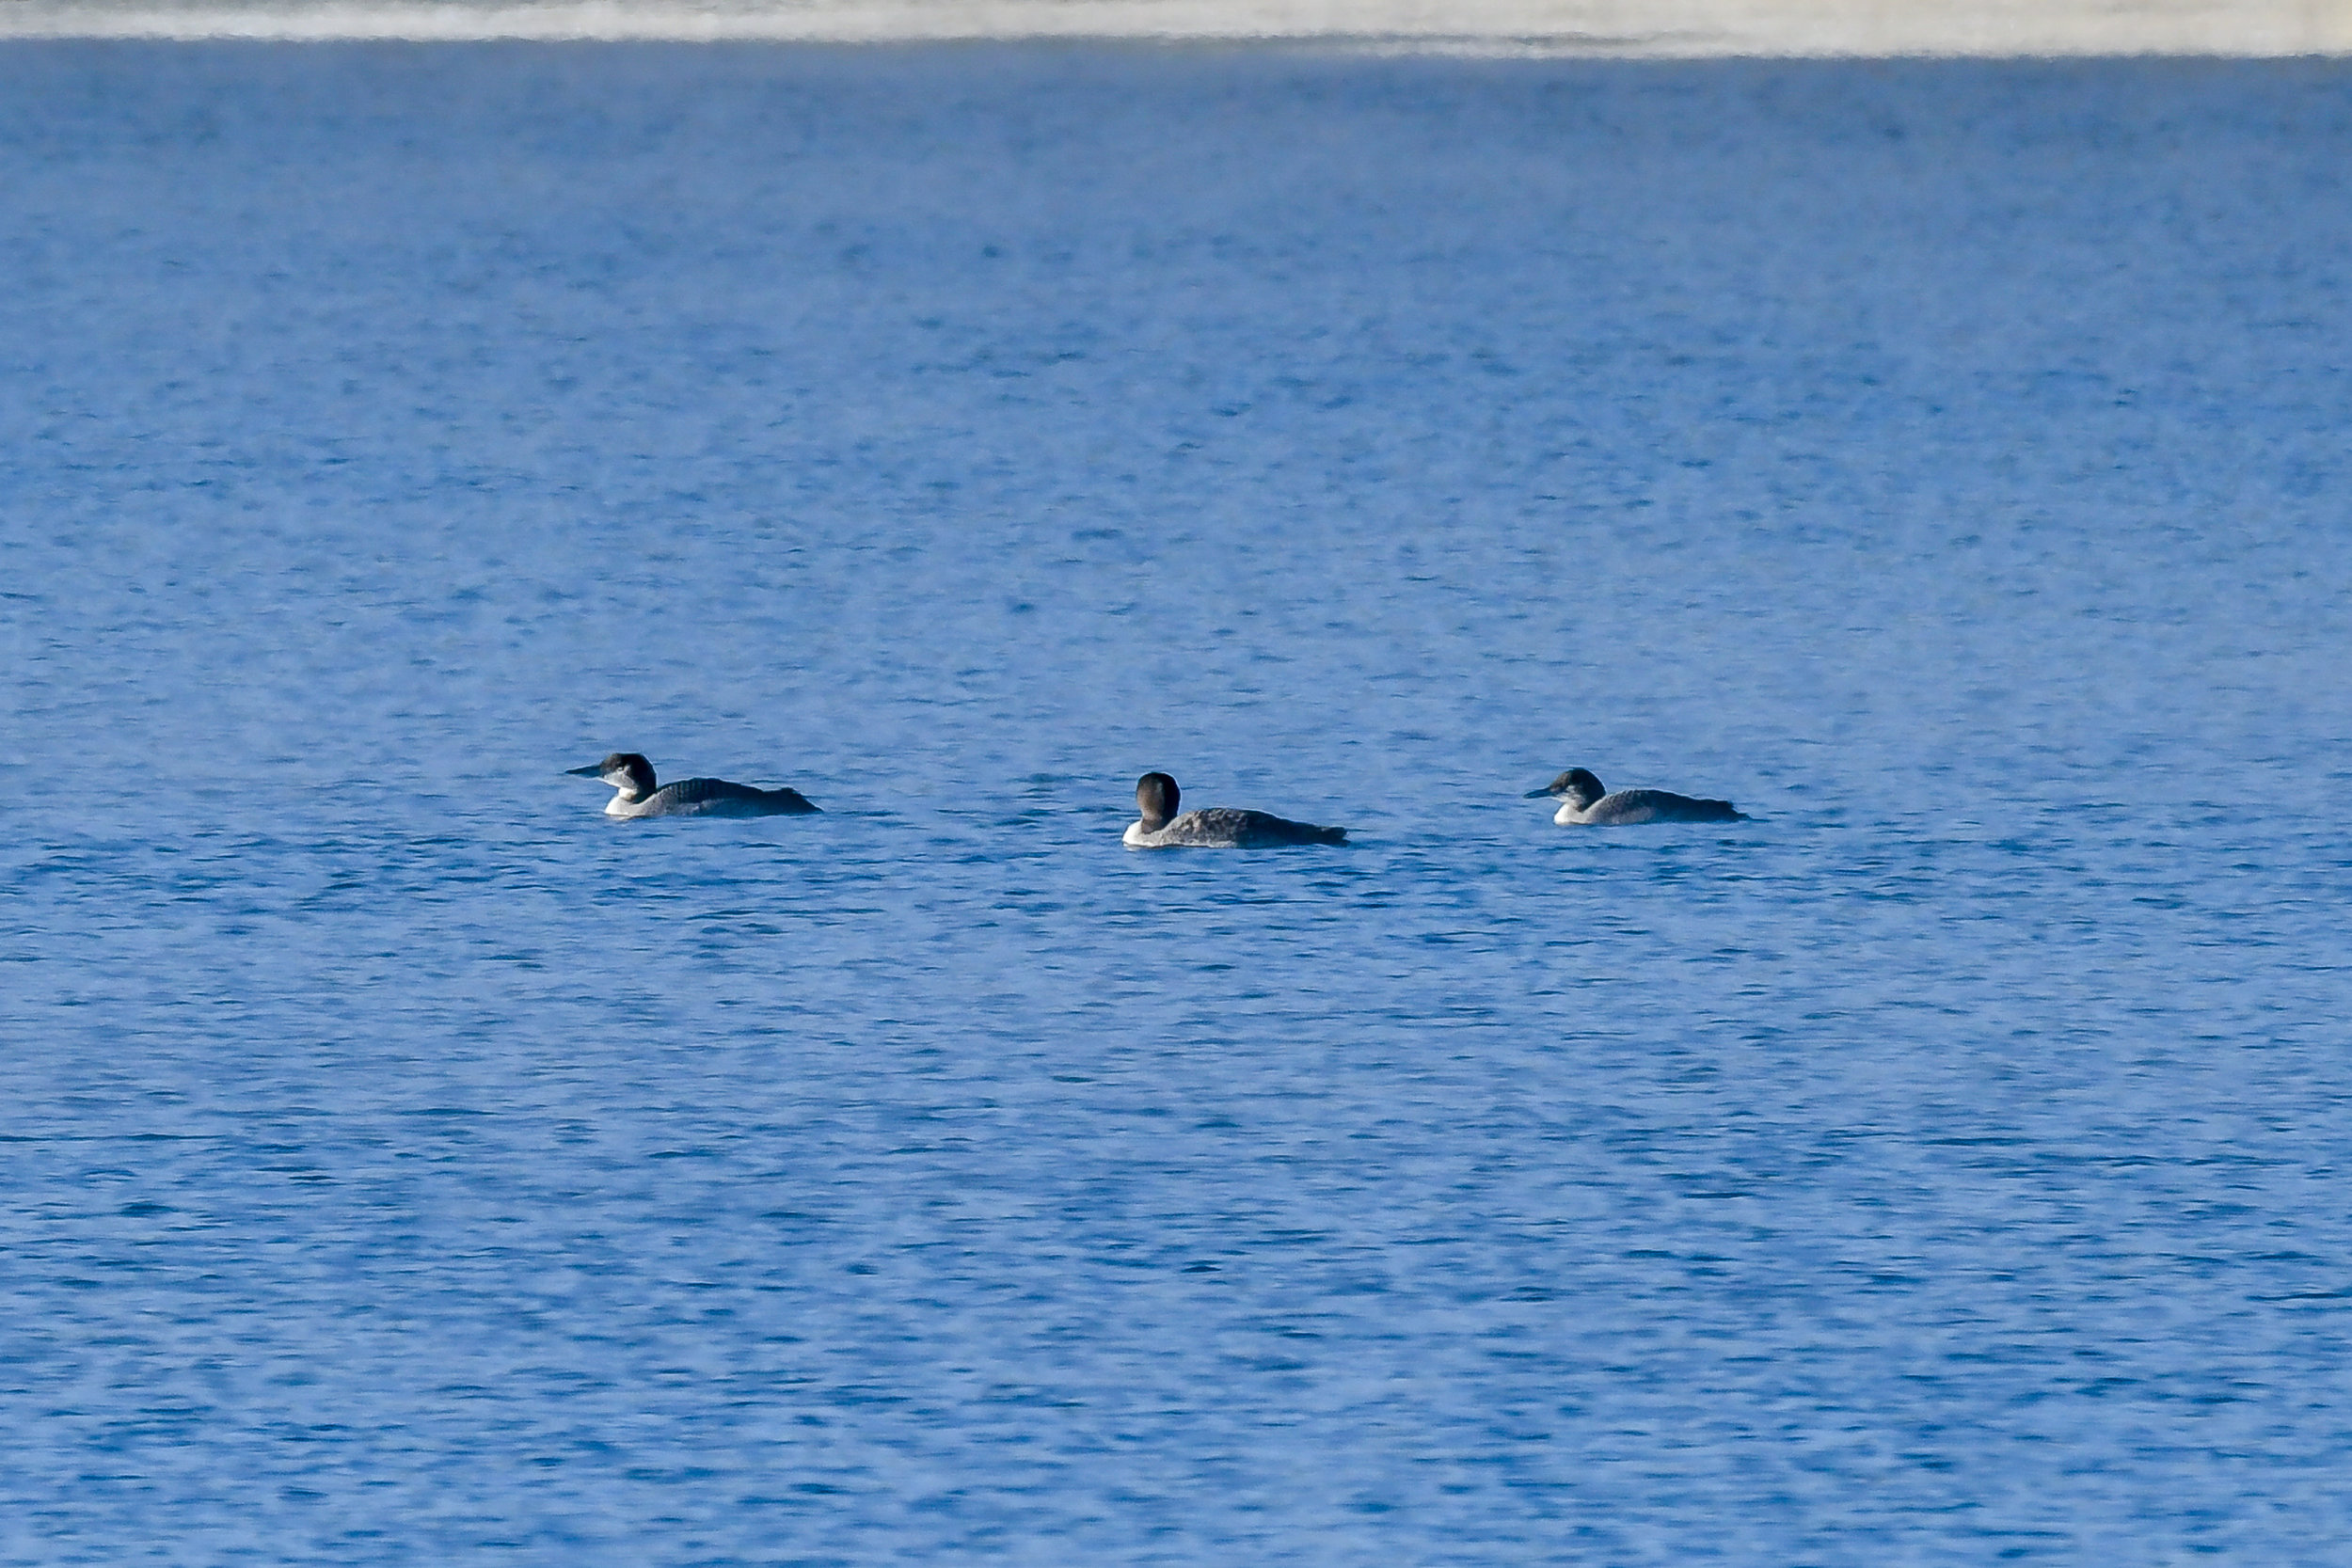   &nbsp;I was pleasantly surprised this morning when I found these three loons hanging out together on Quabbin. The loon in the middle is the loon we named "Whitey" because of the white strip of feathers in the back of his head (If you look close you